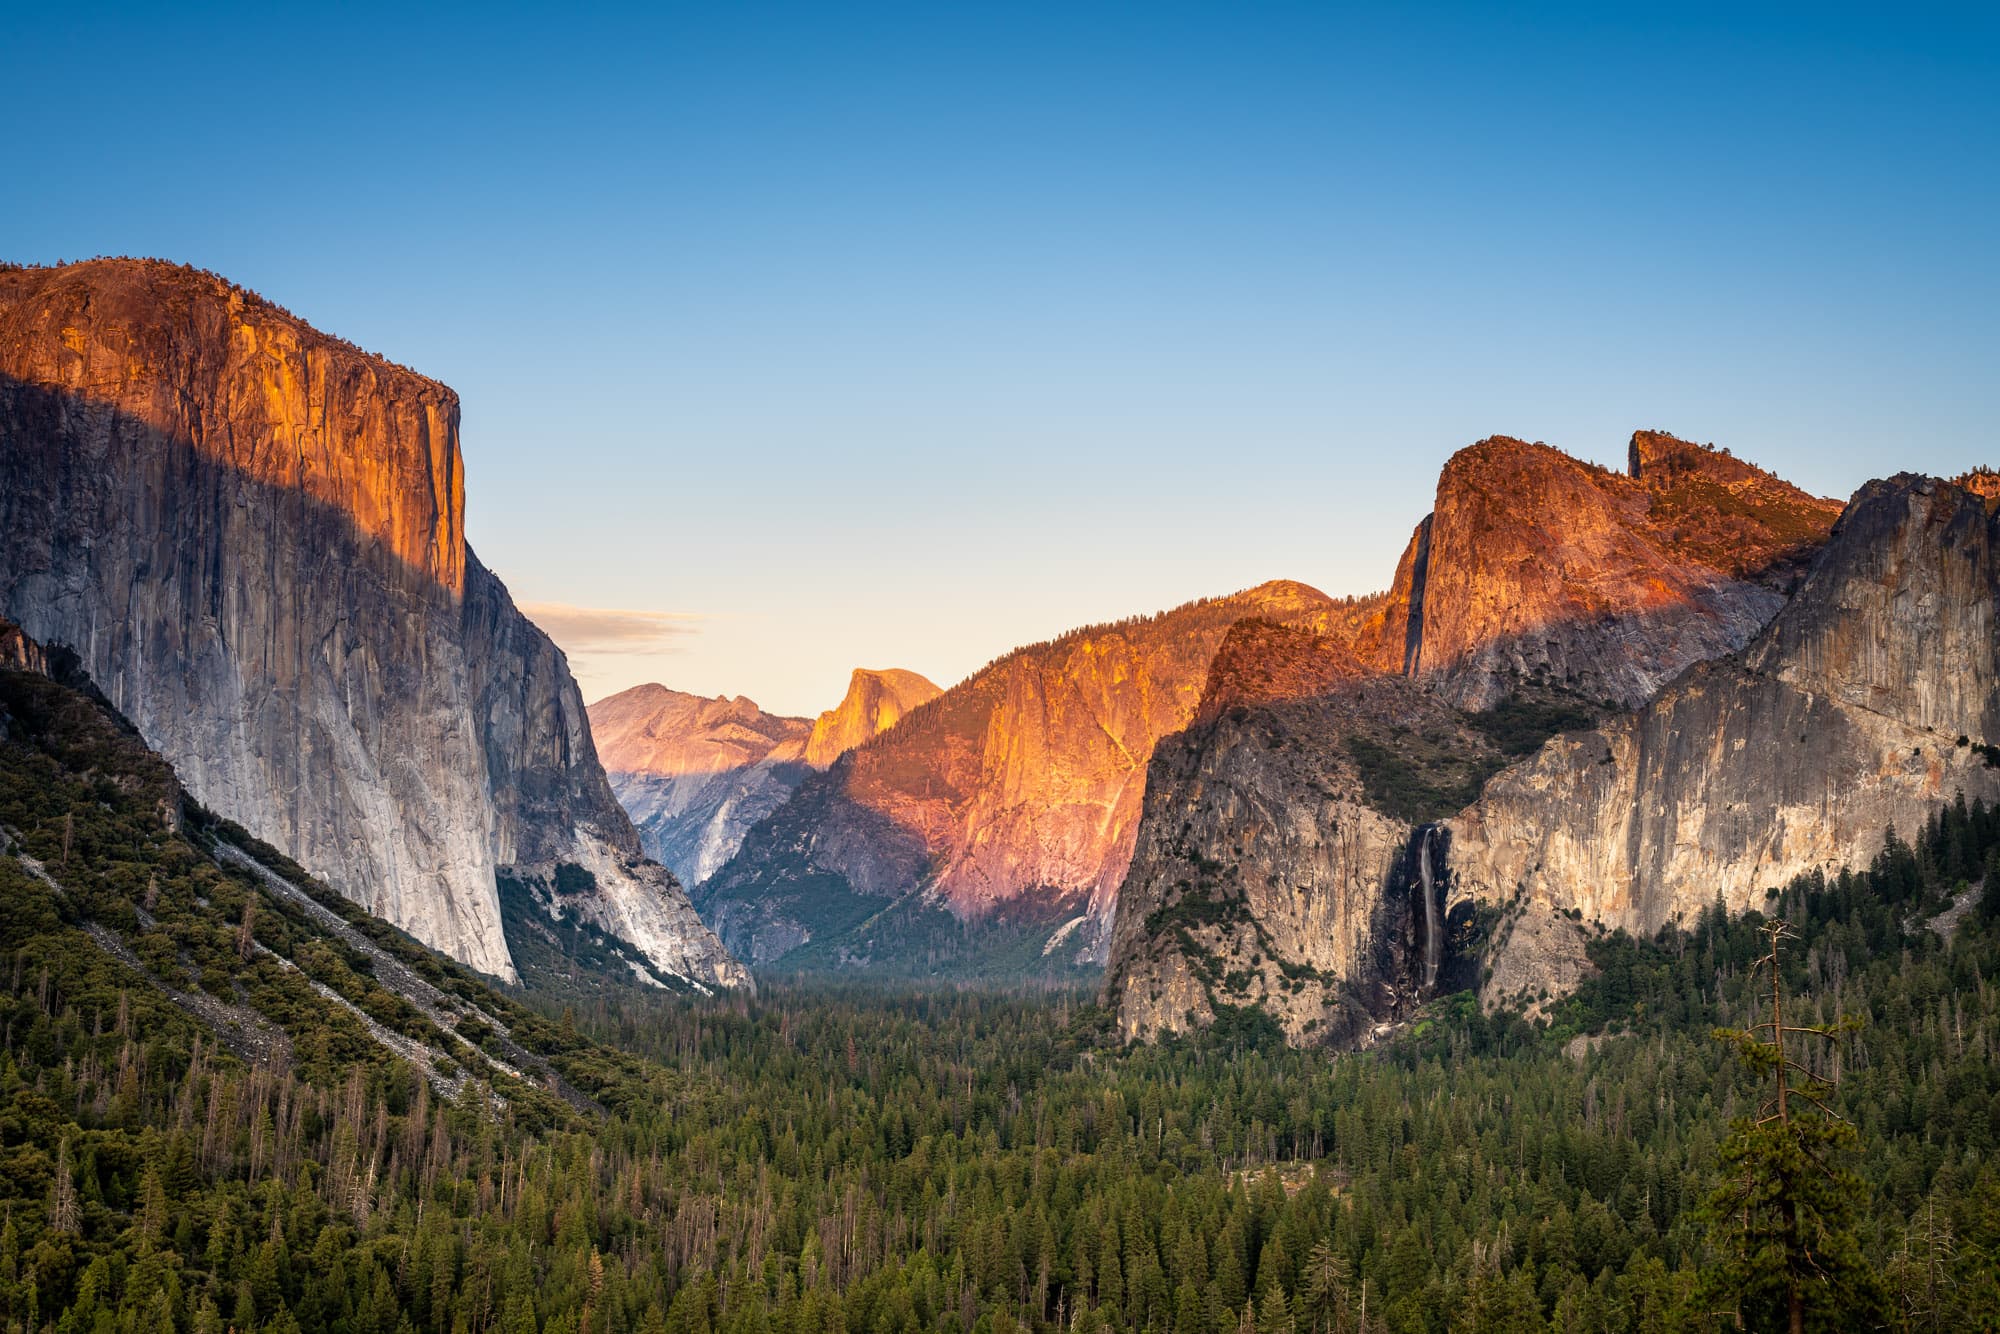 Tunnel view at sunset, Yosemite National Park